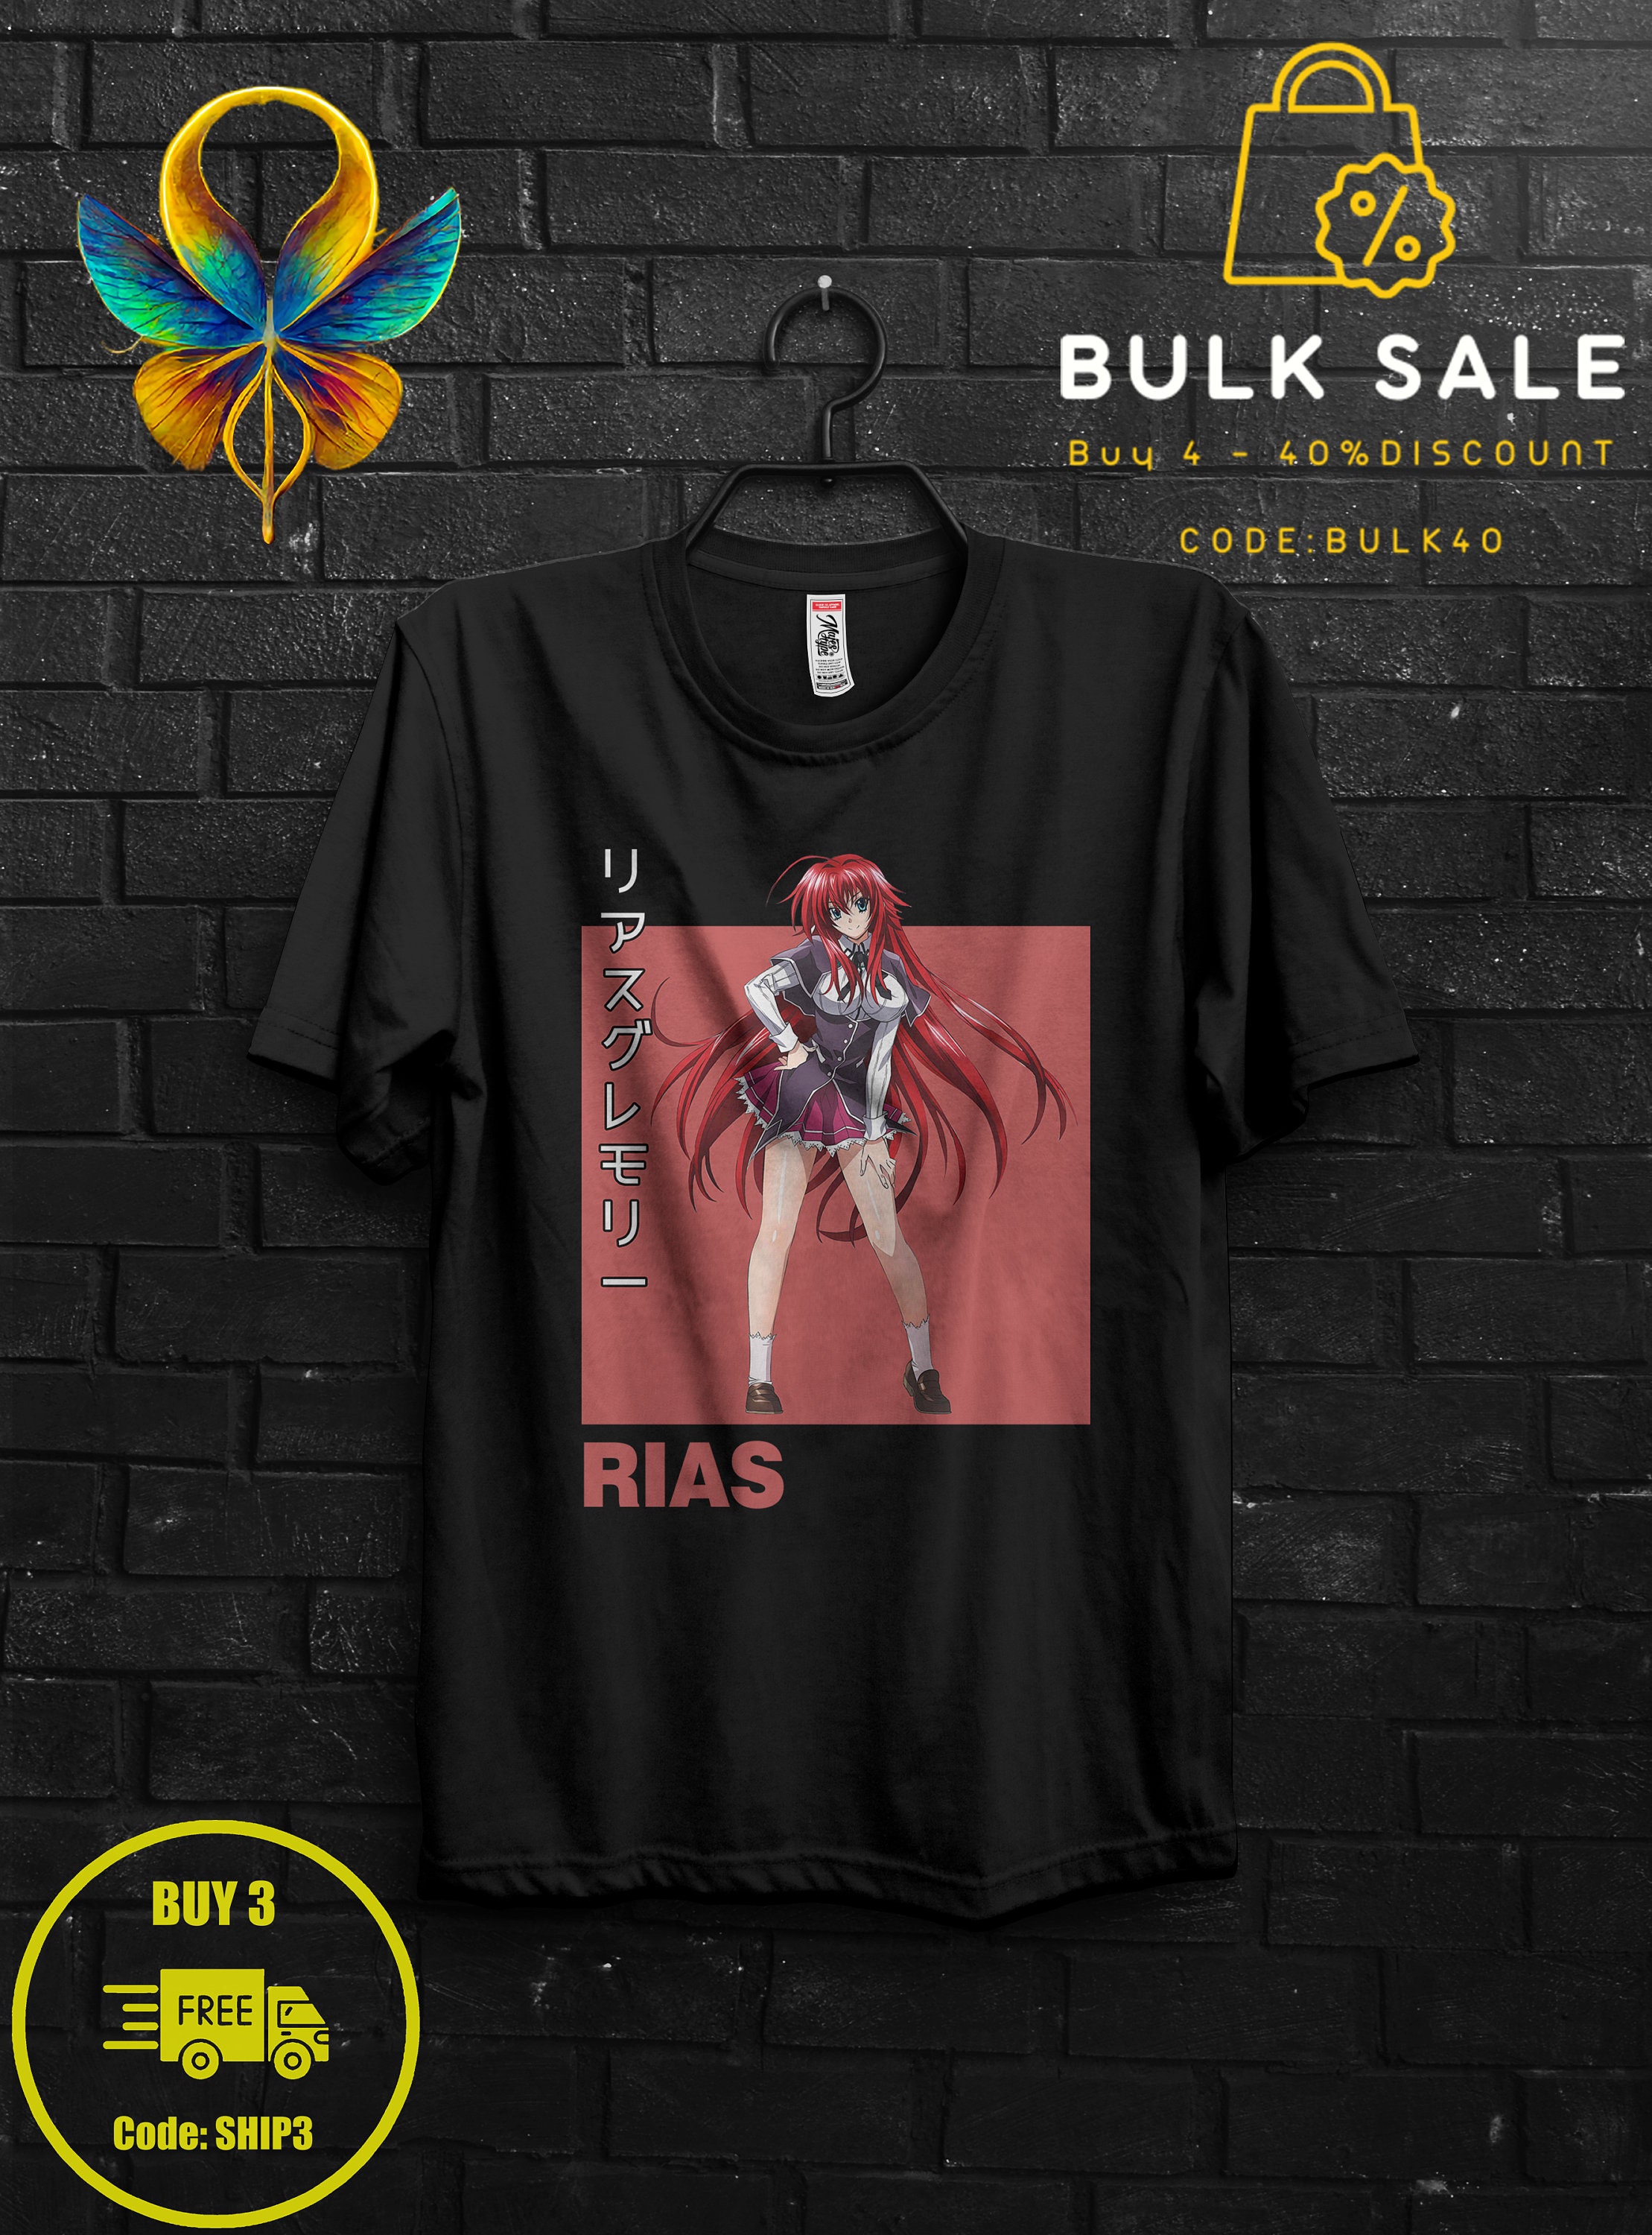 Rias Gremory Shirt Anime Gift Cosplay For Girl,Rossweisse Tshirt For Sitri,Issei Hyoudou Sweat,Xenovia Appareal For Her,High School DxD Tee 1600246565